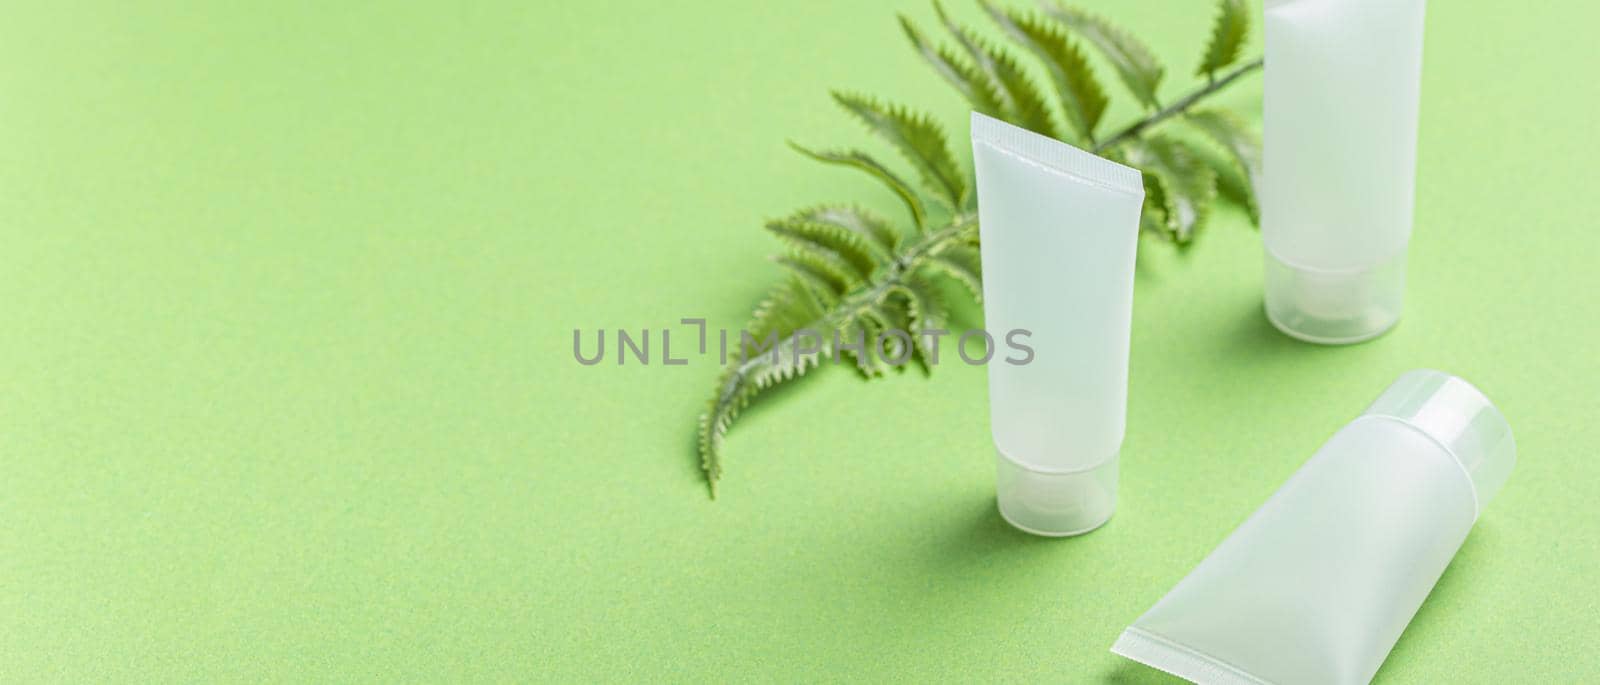 Skincare organic beauty product bottles, plant leaves on green background by its_al_dente